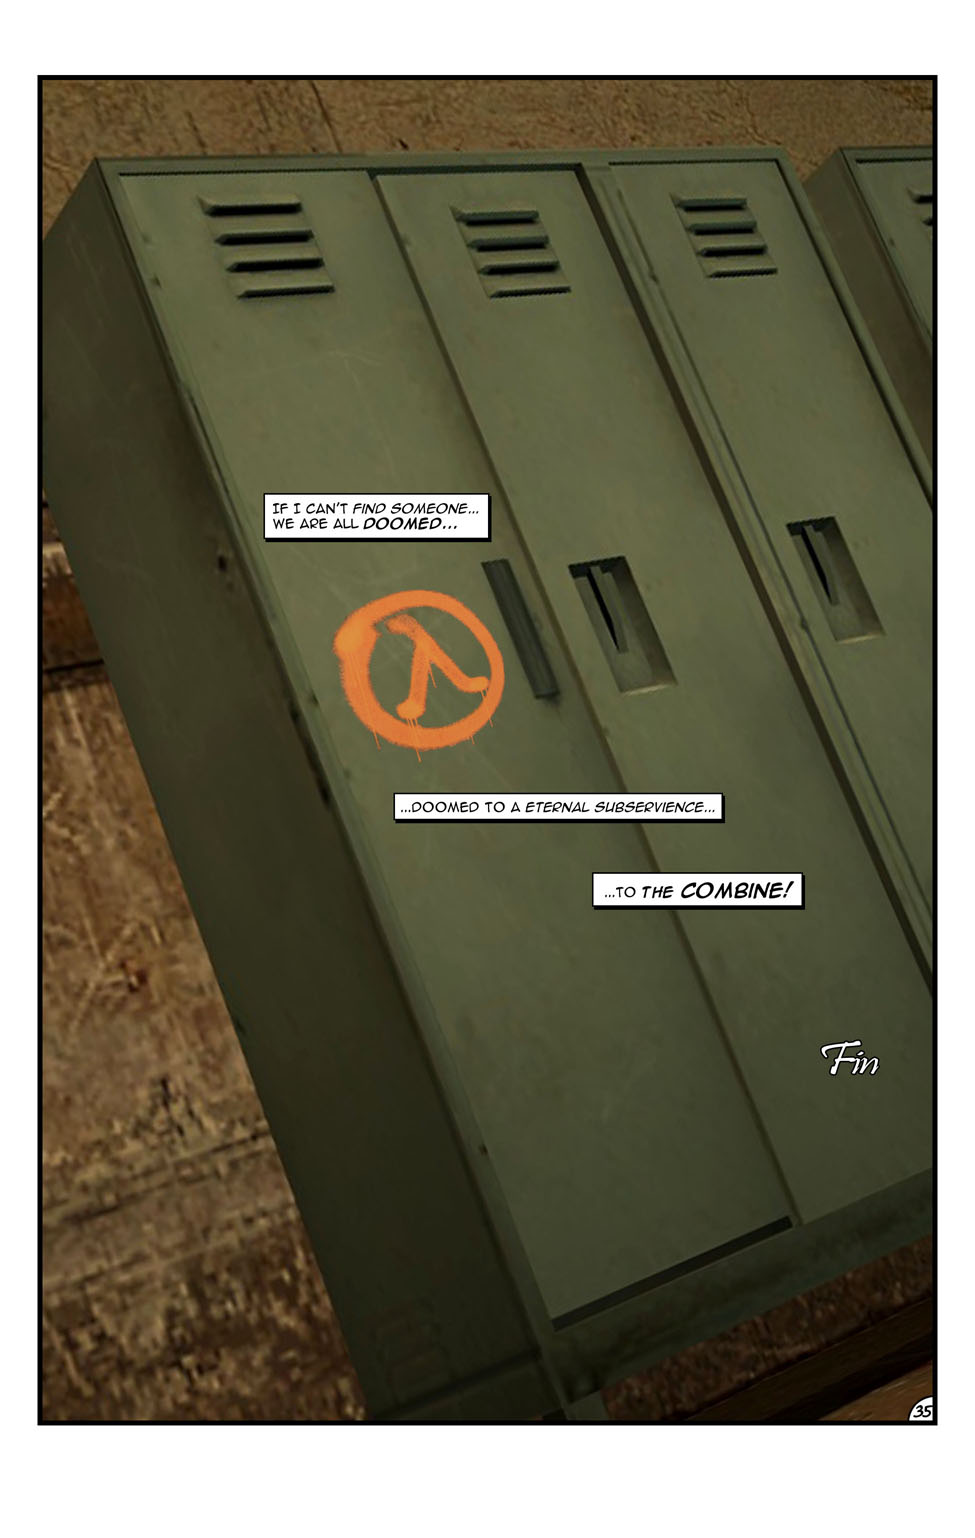 As Mikael thinks to himself that he has to find someone or they're all doomed to eternal subservience to the Combine, we get one last look at the ominous locker where he left his secret, now marked with a graffiti of a lambda. Fin.